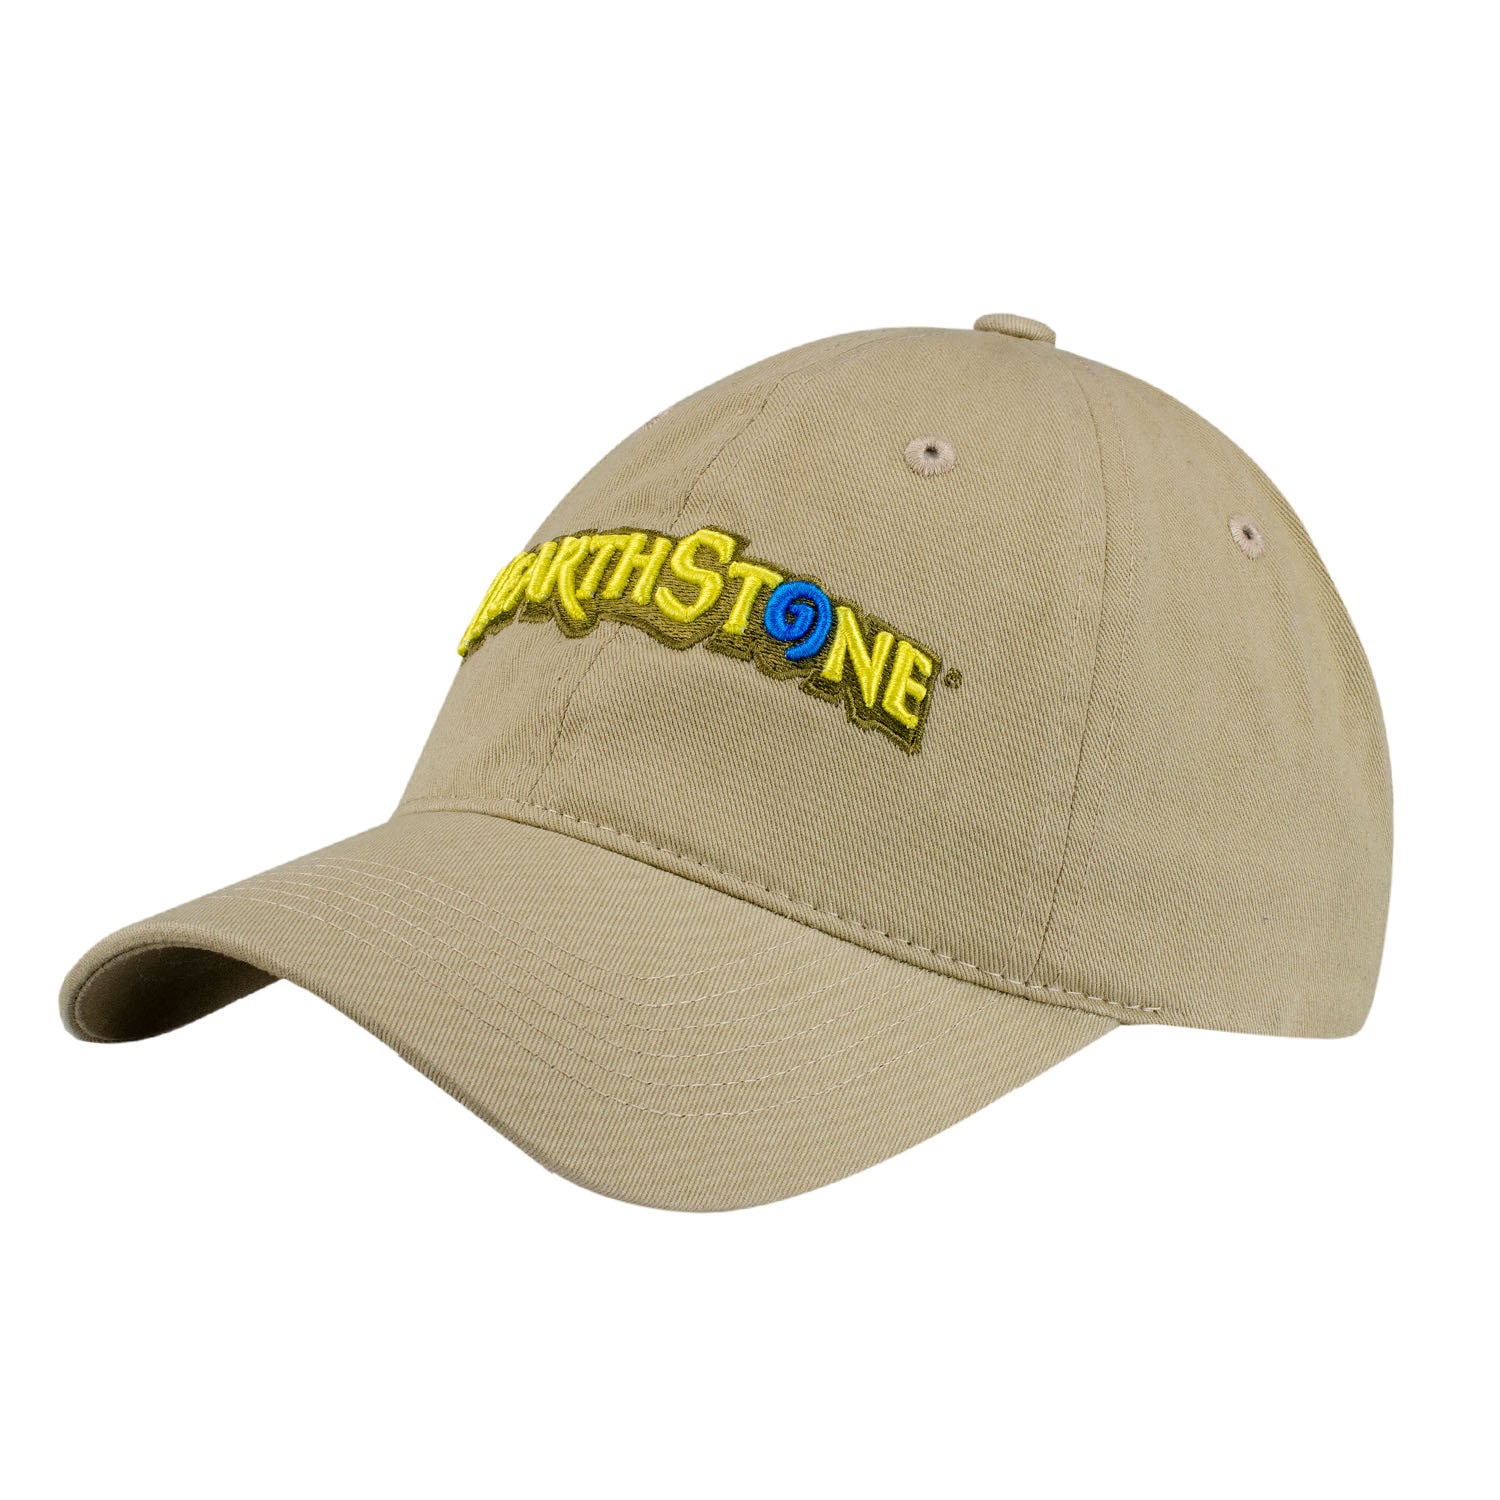 Hearthstone Tan Dad Hat - Left View